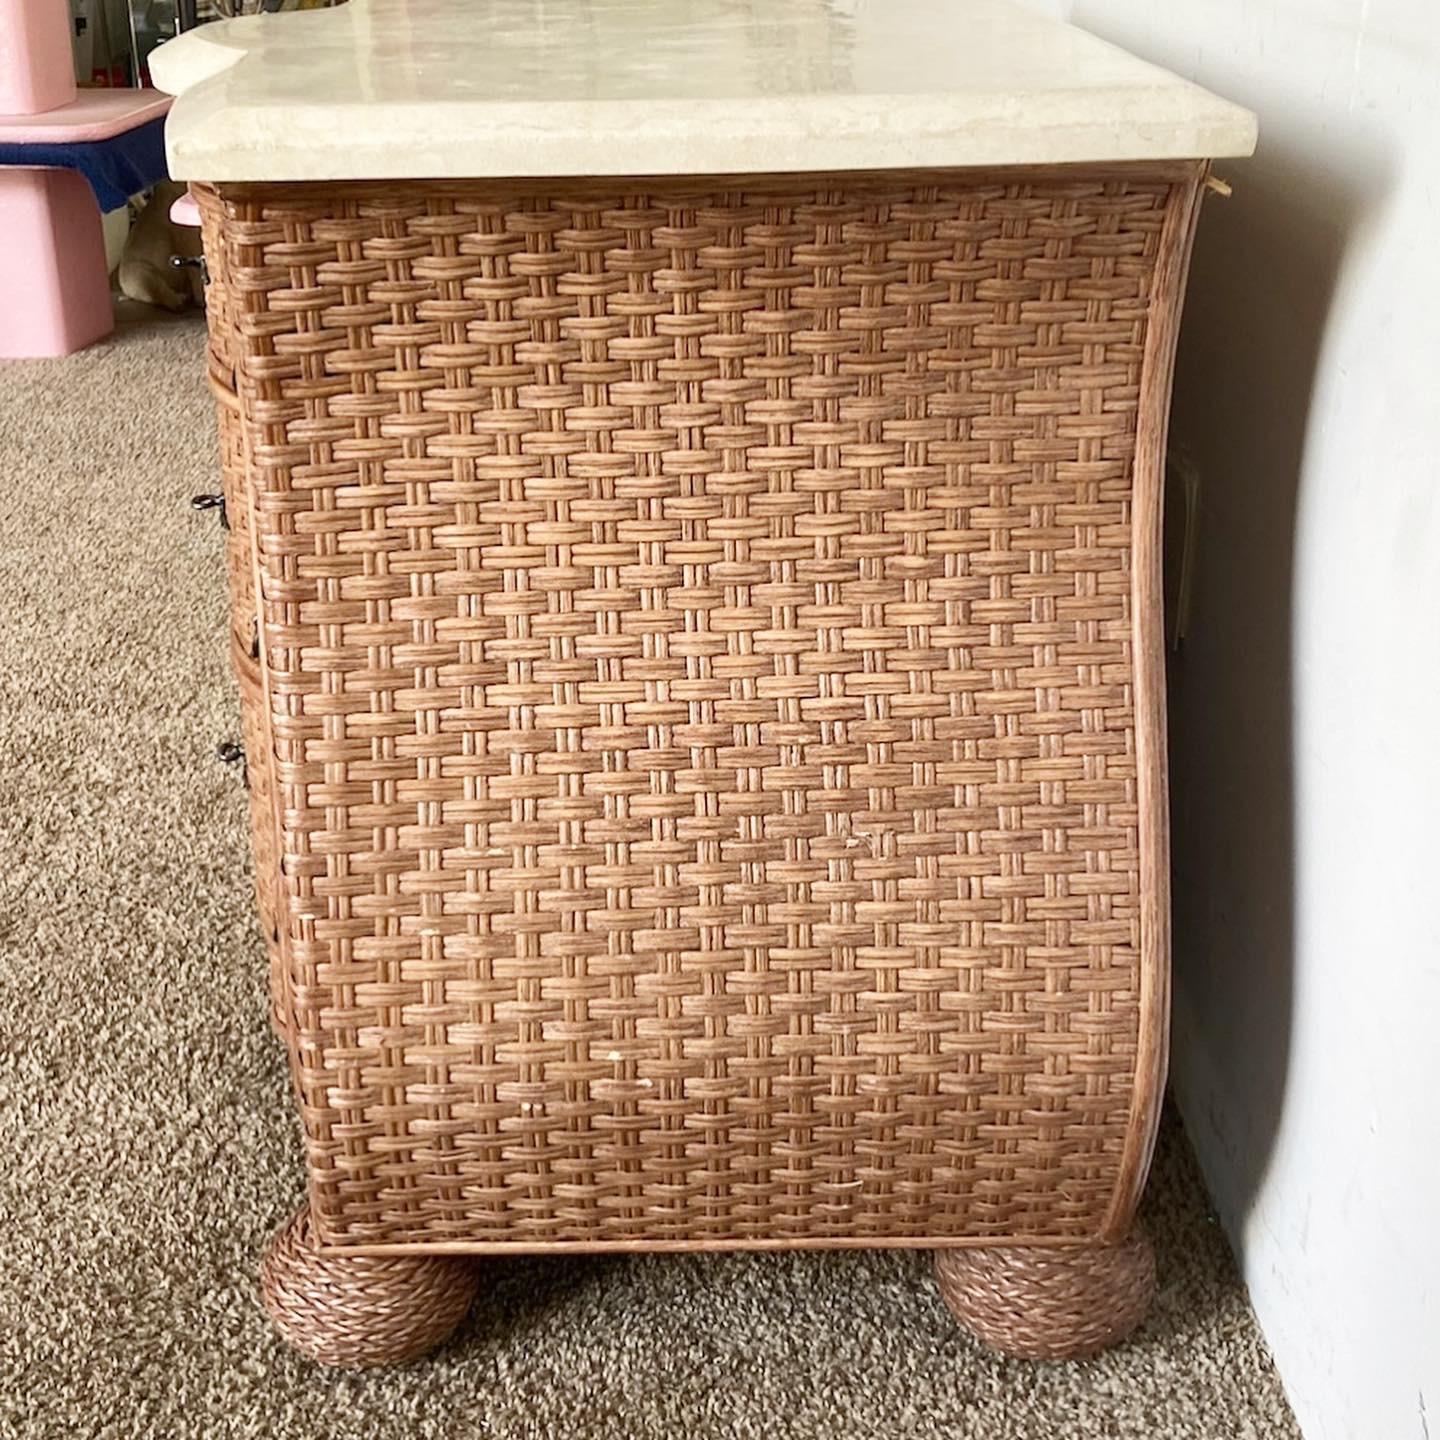 Boho Chic Wicker Tessellated Stone Top Chest of Drawers In Good Condition For Sale In Delray Beach, FL